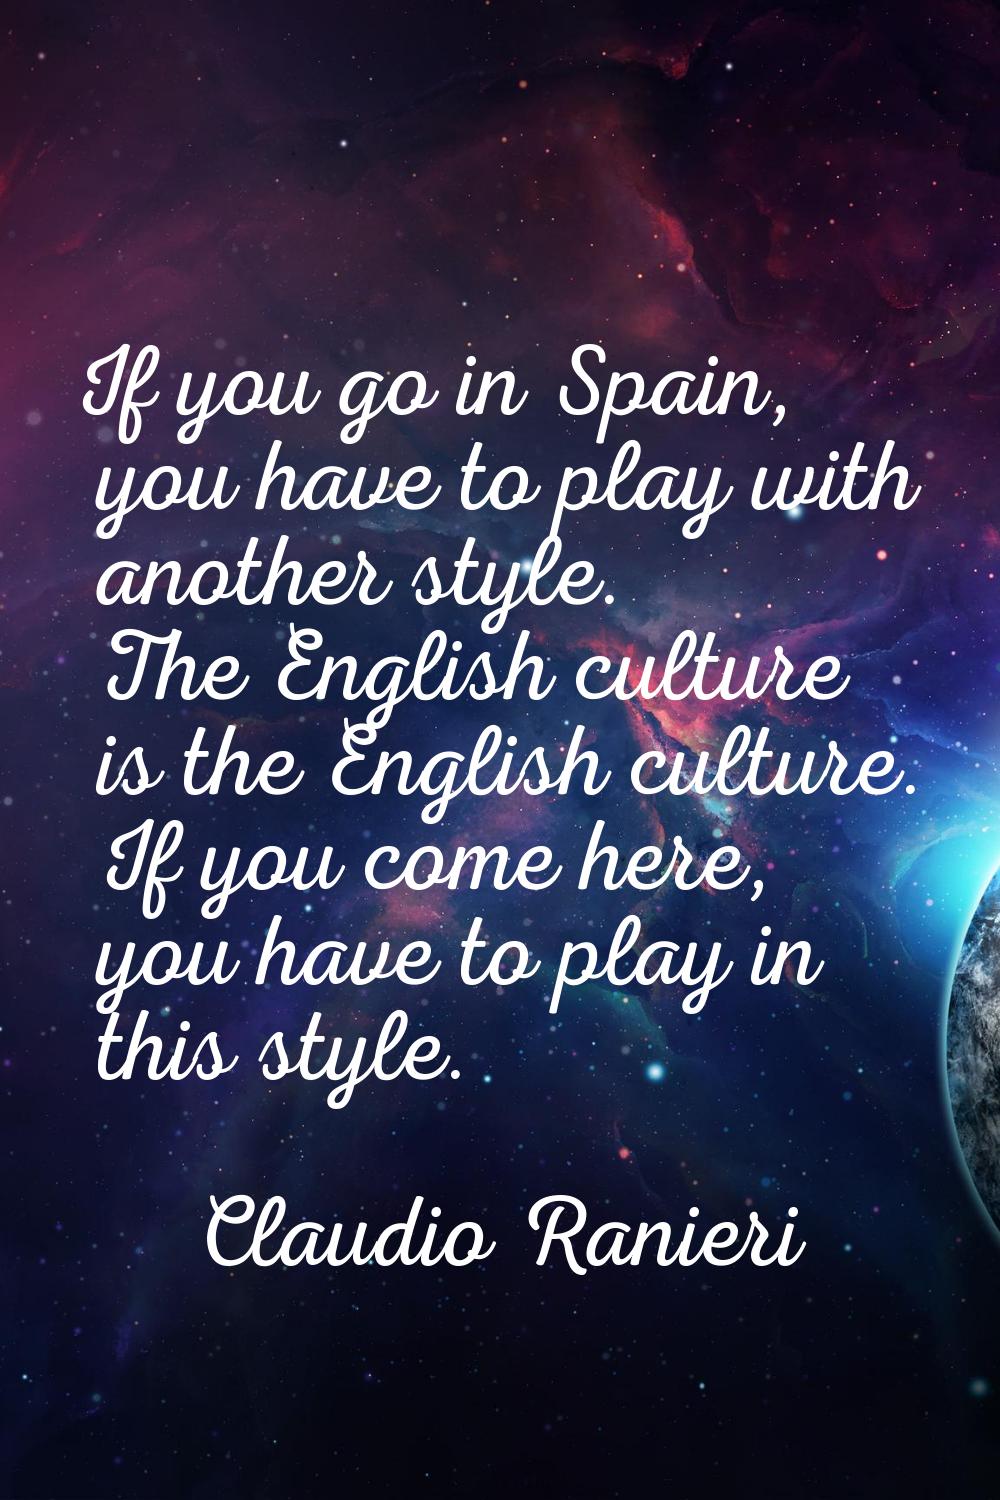 If you go in Spain, you have to play with another style. The English culture is the English culture